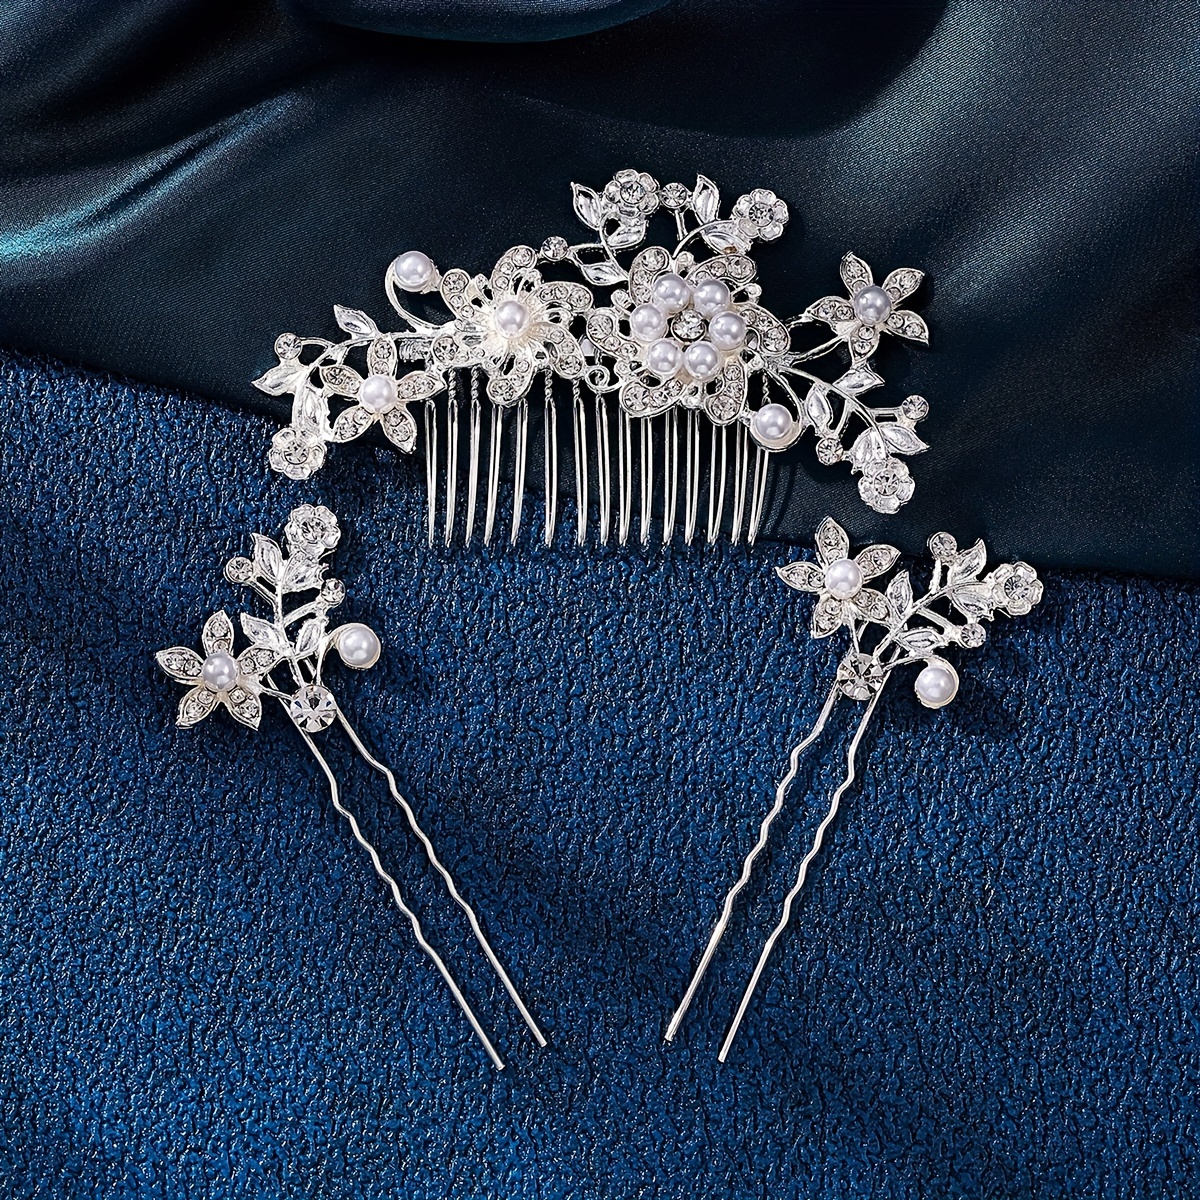 

3pcs, Elegant Exquisite Shiny Hair Comb & U Shape Hairpins, Women Girls Casual Party Wedding Supplies, Princess Fairy Style Bridal Fresh Hair Accessories, Gift Photo Props